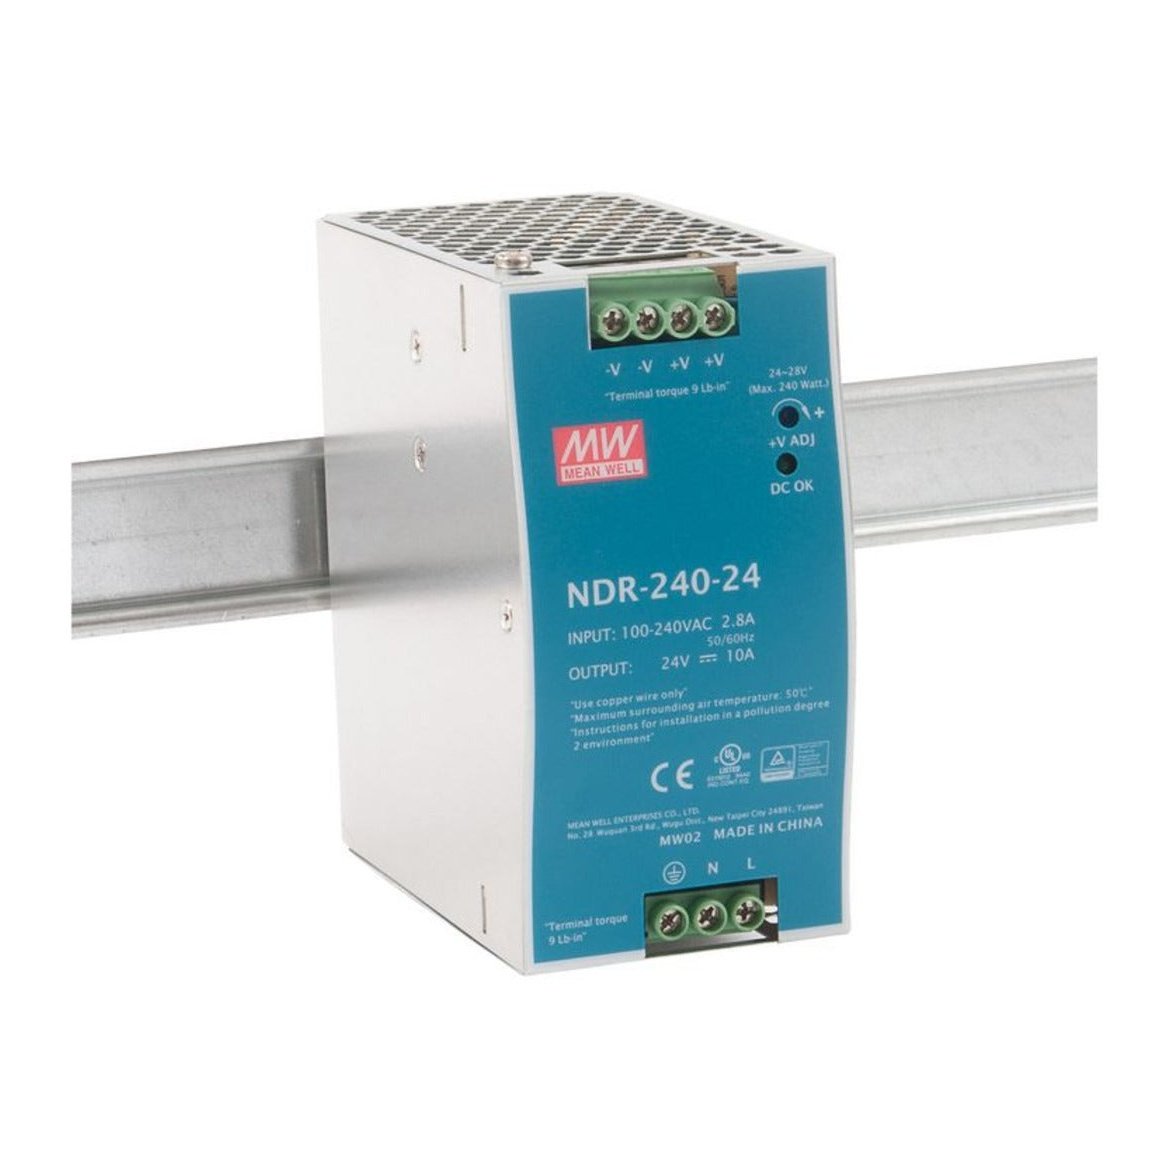 NDR-240-24 Mean Well SMPS 24V 10A DIN Rail Power Supply | Reliable Industrial Solution voltkart